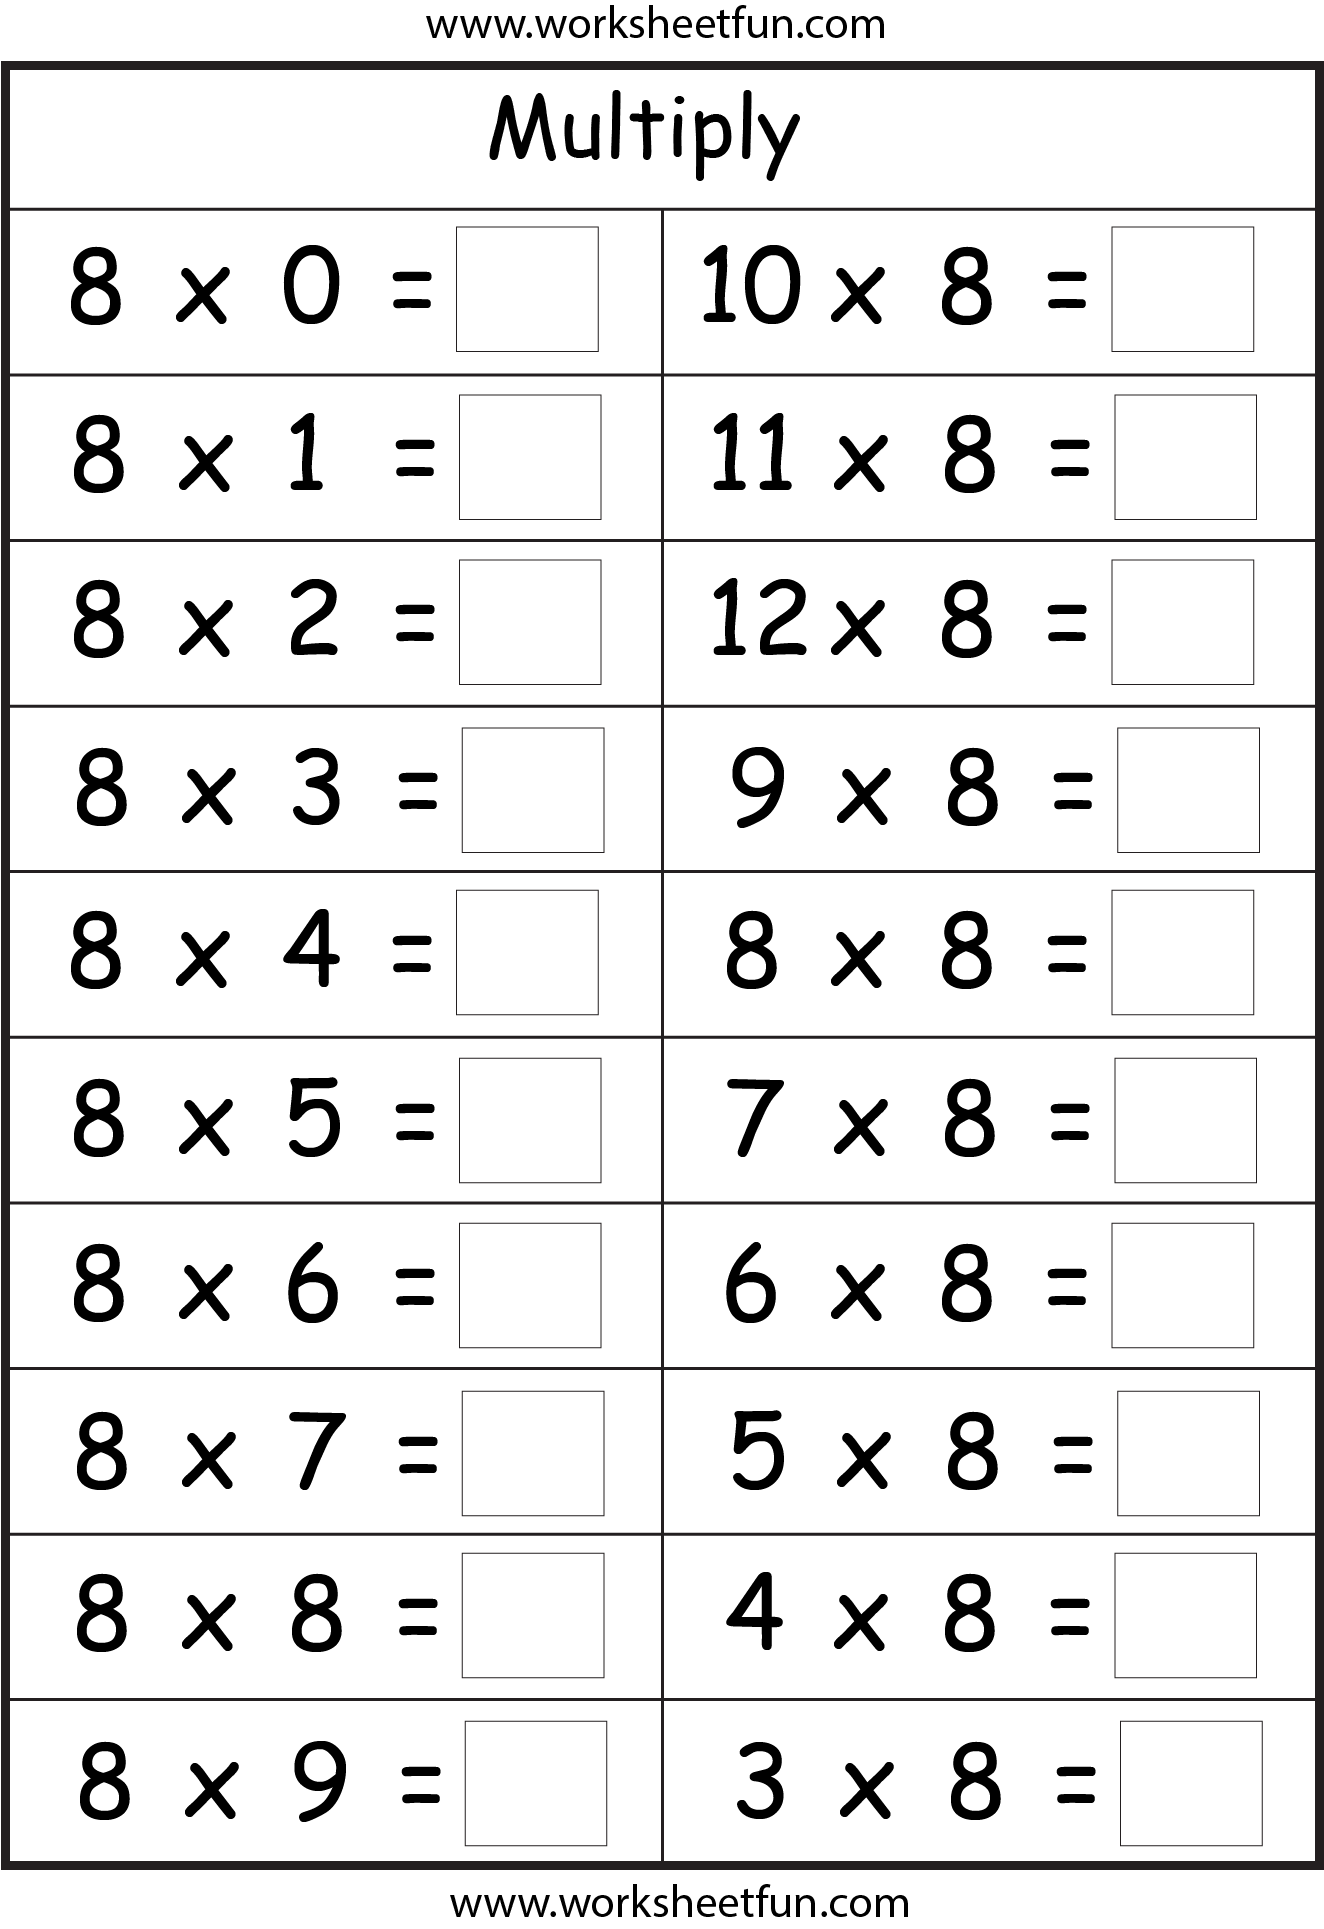 Multiplication Basic Facts 2 3 4 5 6 7 8 9 Times 